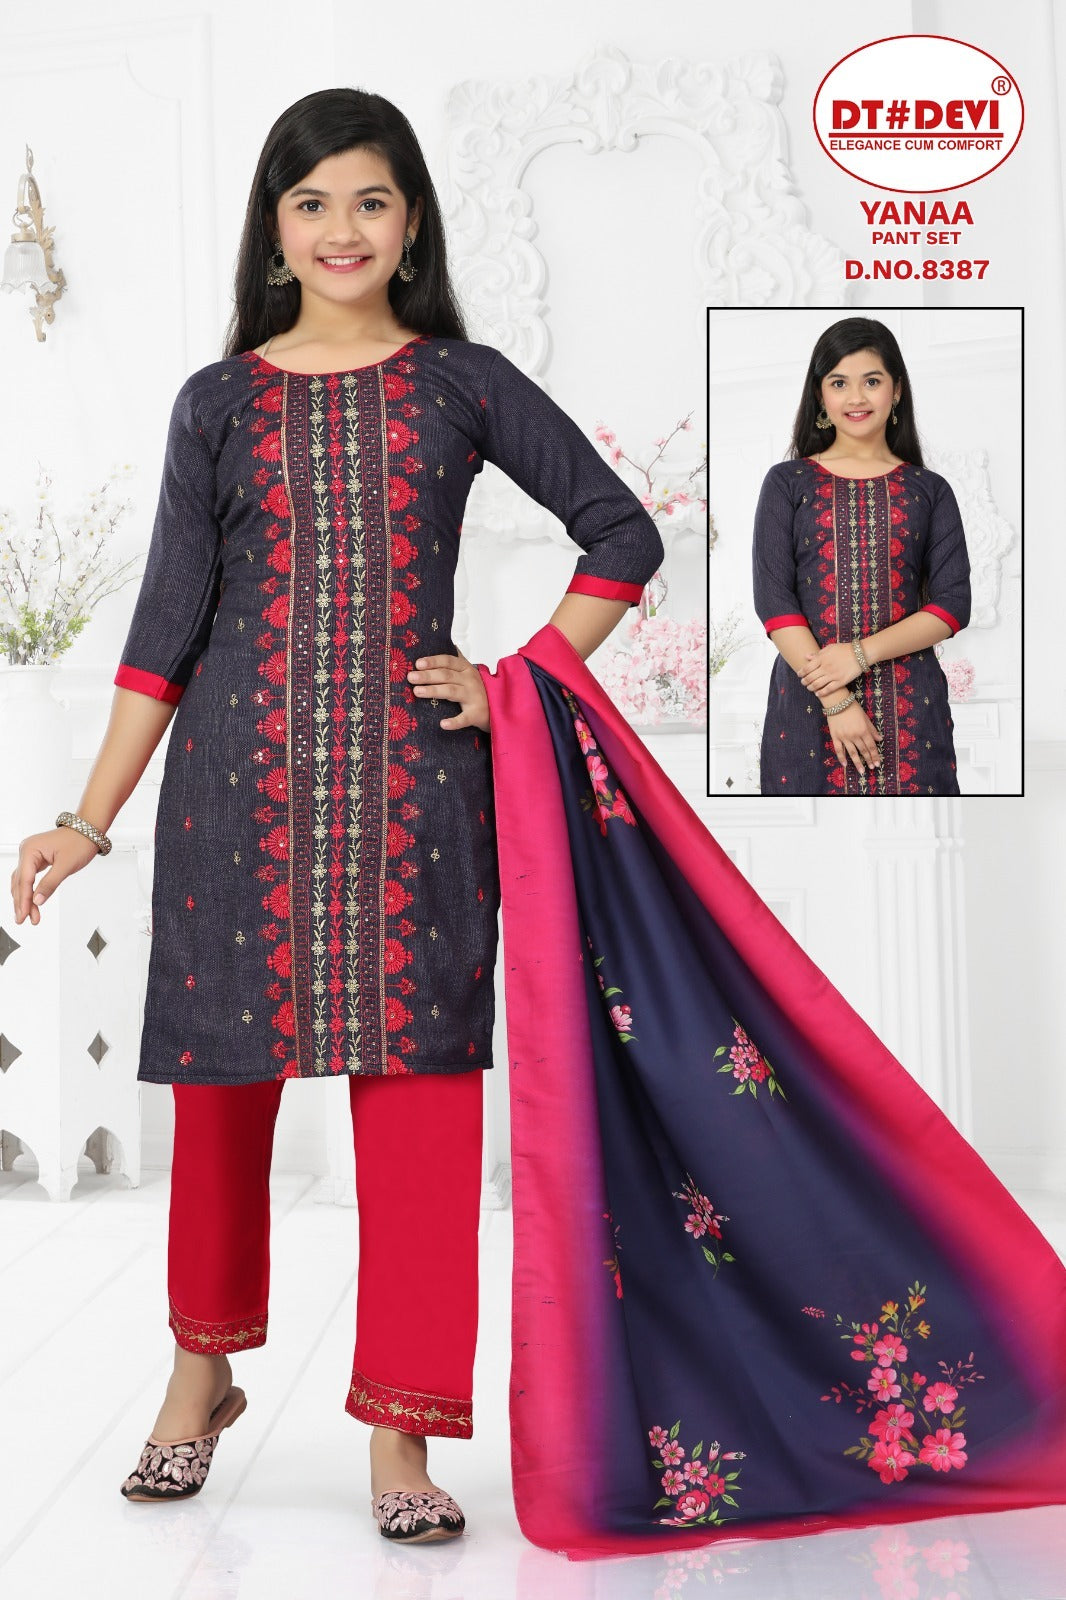 Yanaa-8387 Dt Devi Cotton Girls Readymade Pant Suits